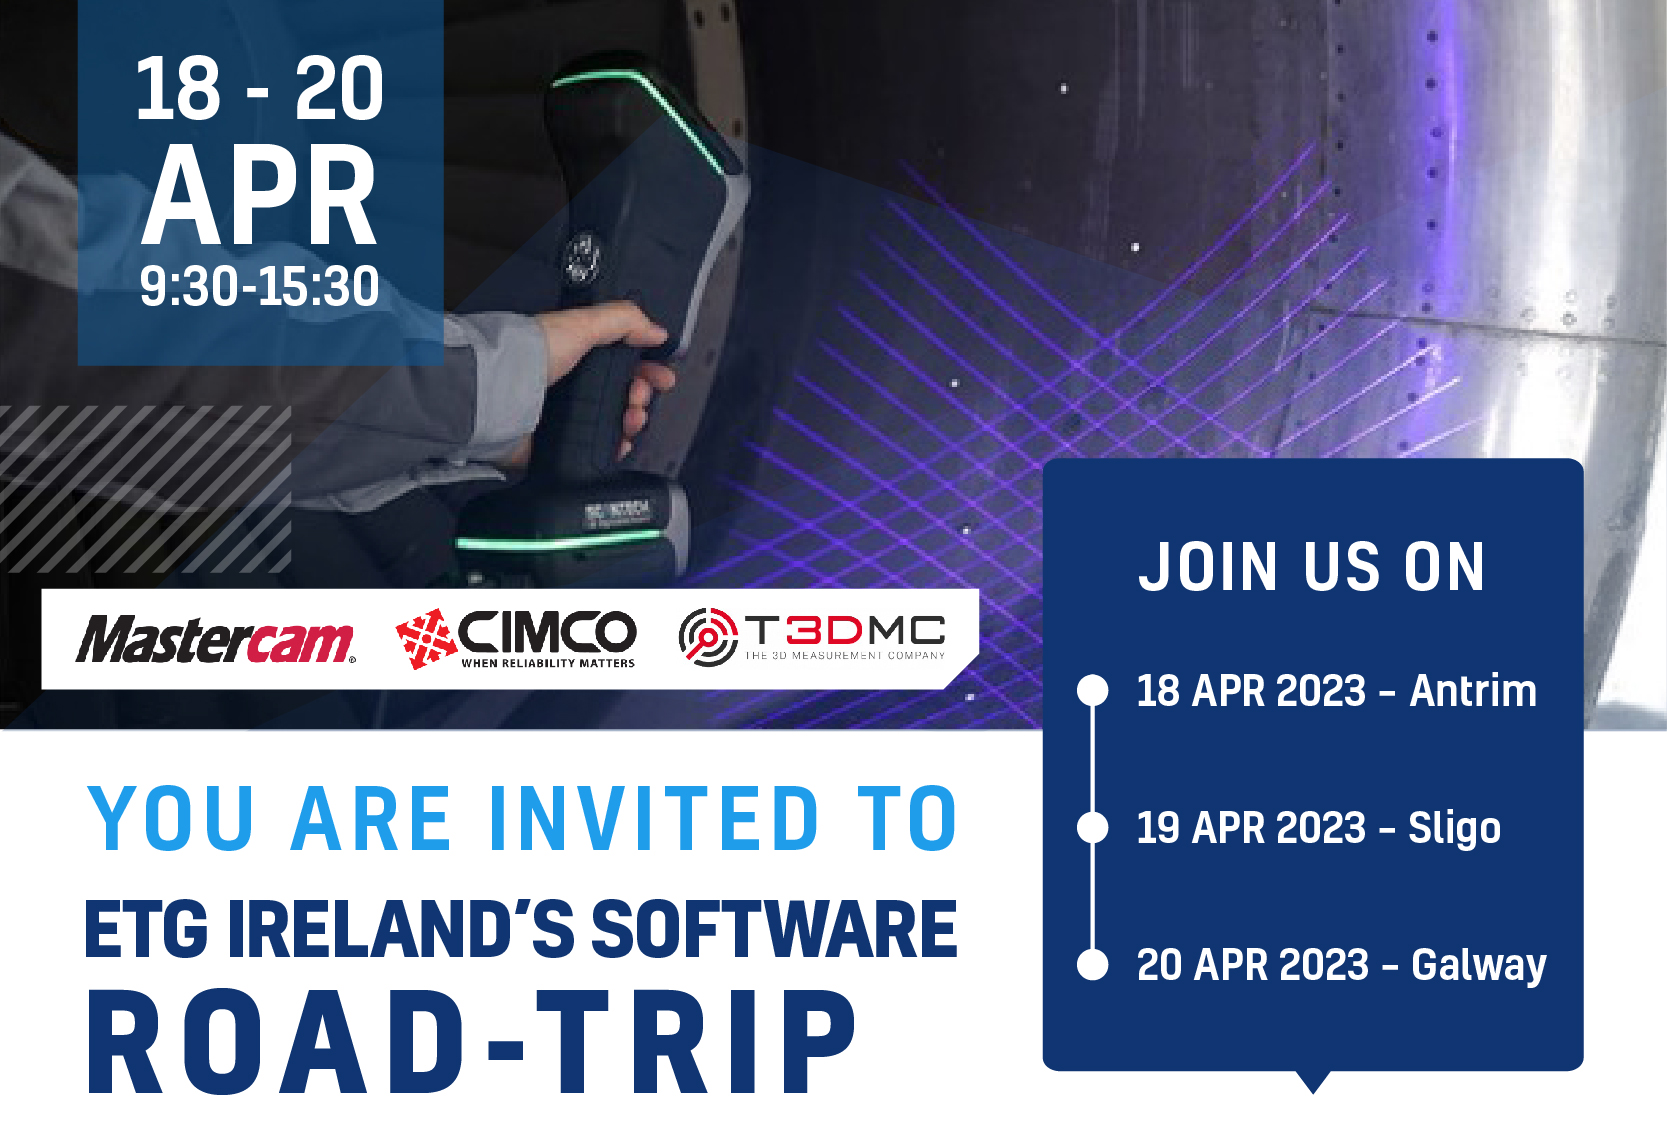 An image showing an event invitation about ETG Ireland's Software Road Trip during 18-20 April across Antrim, Sligo and Galway.